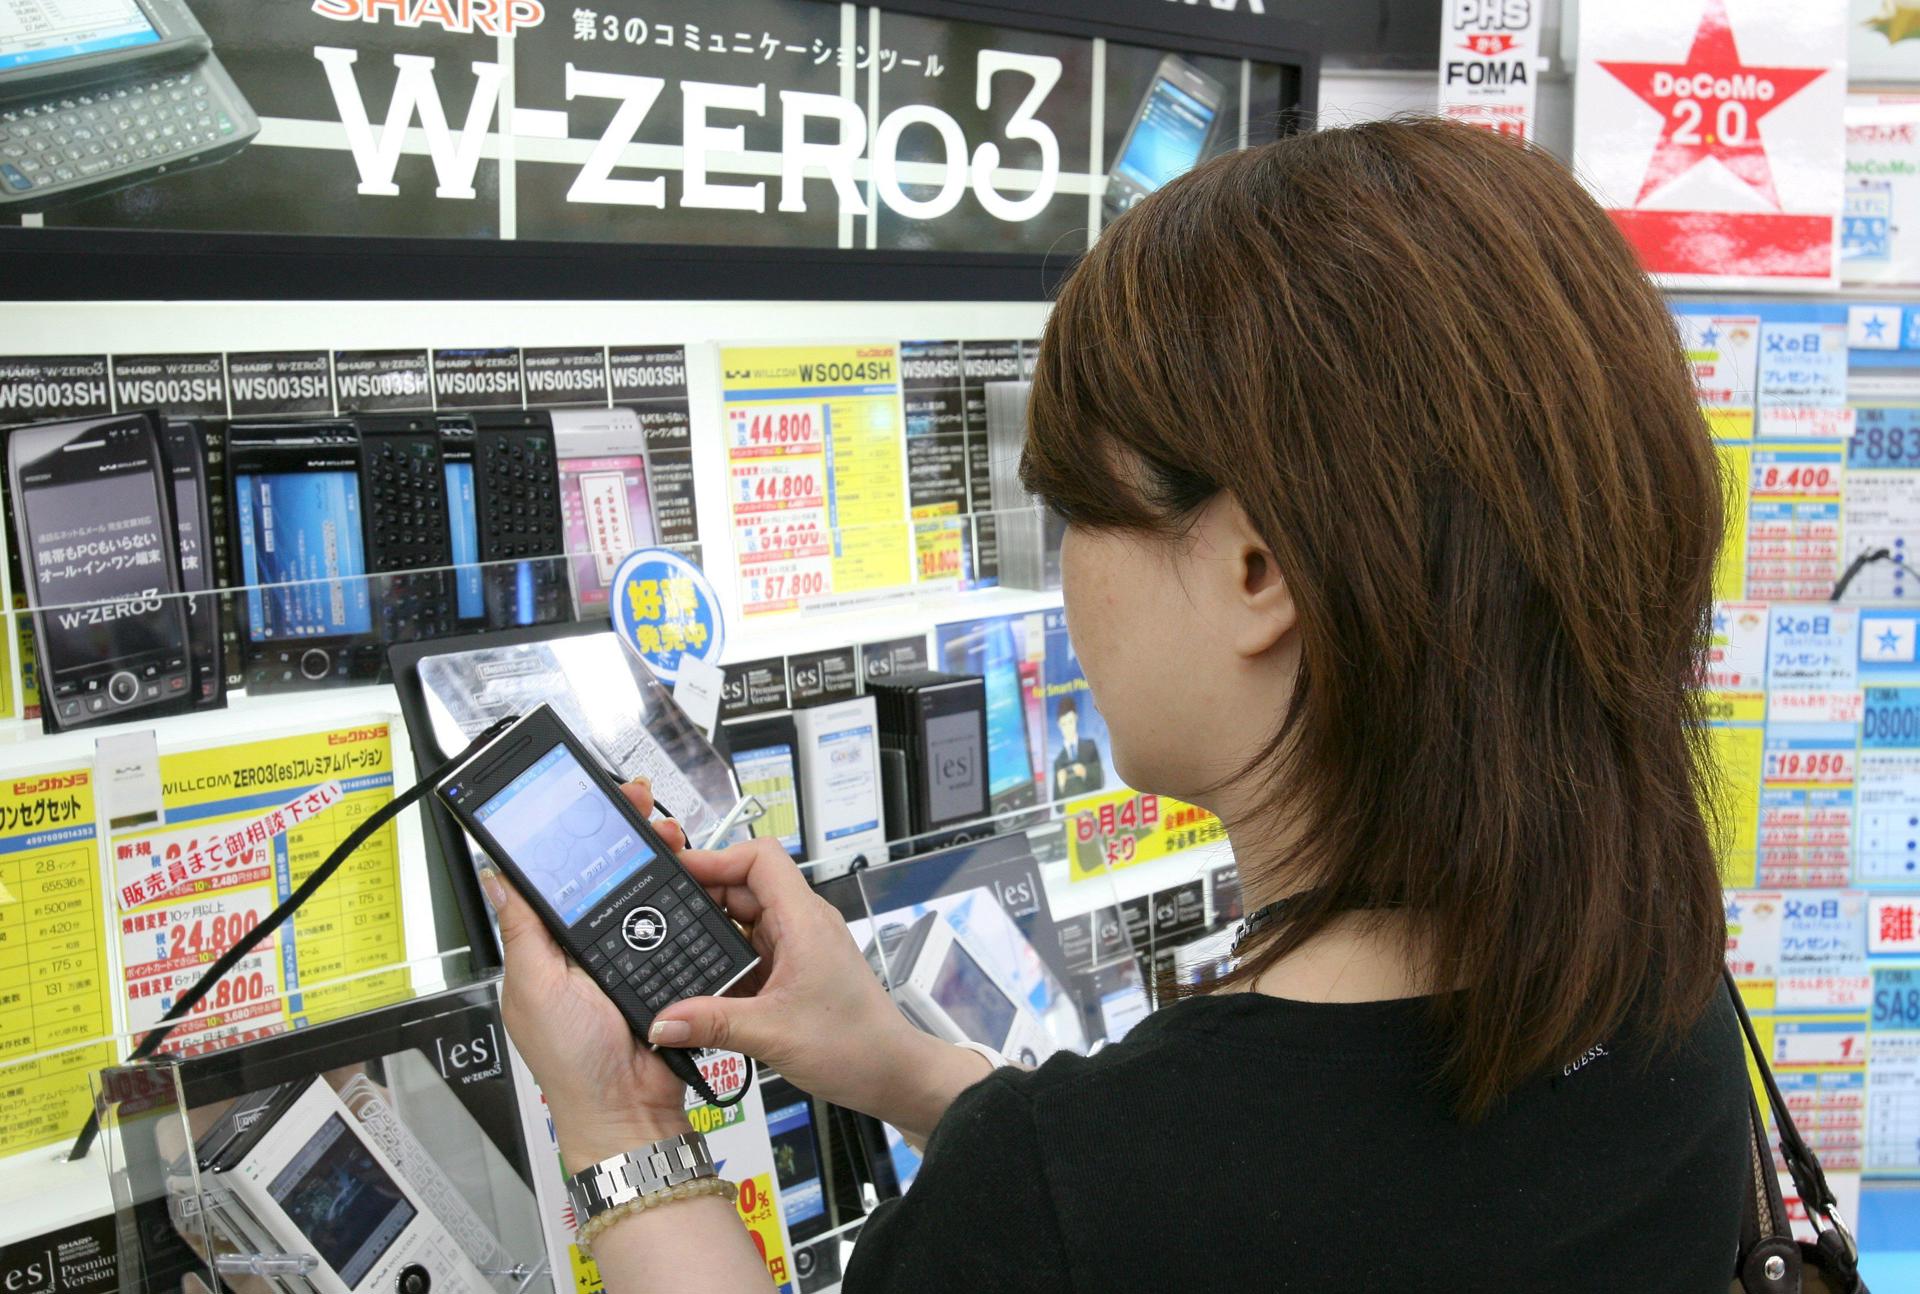 A consumer shops for multifunctional handset, or 'smart phone,' on display at an electronics store in downtown Tokyo, Japan 11 June 2007. EPA/FILE/EVERETT KENNEDY BROWN